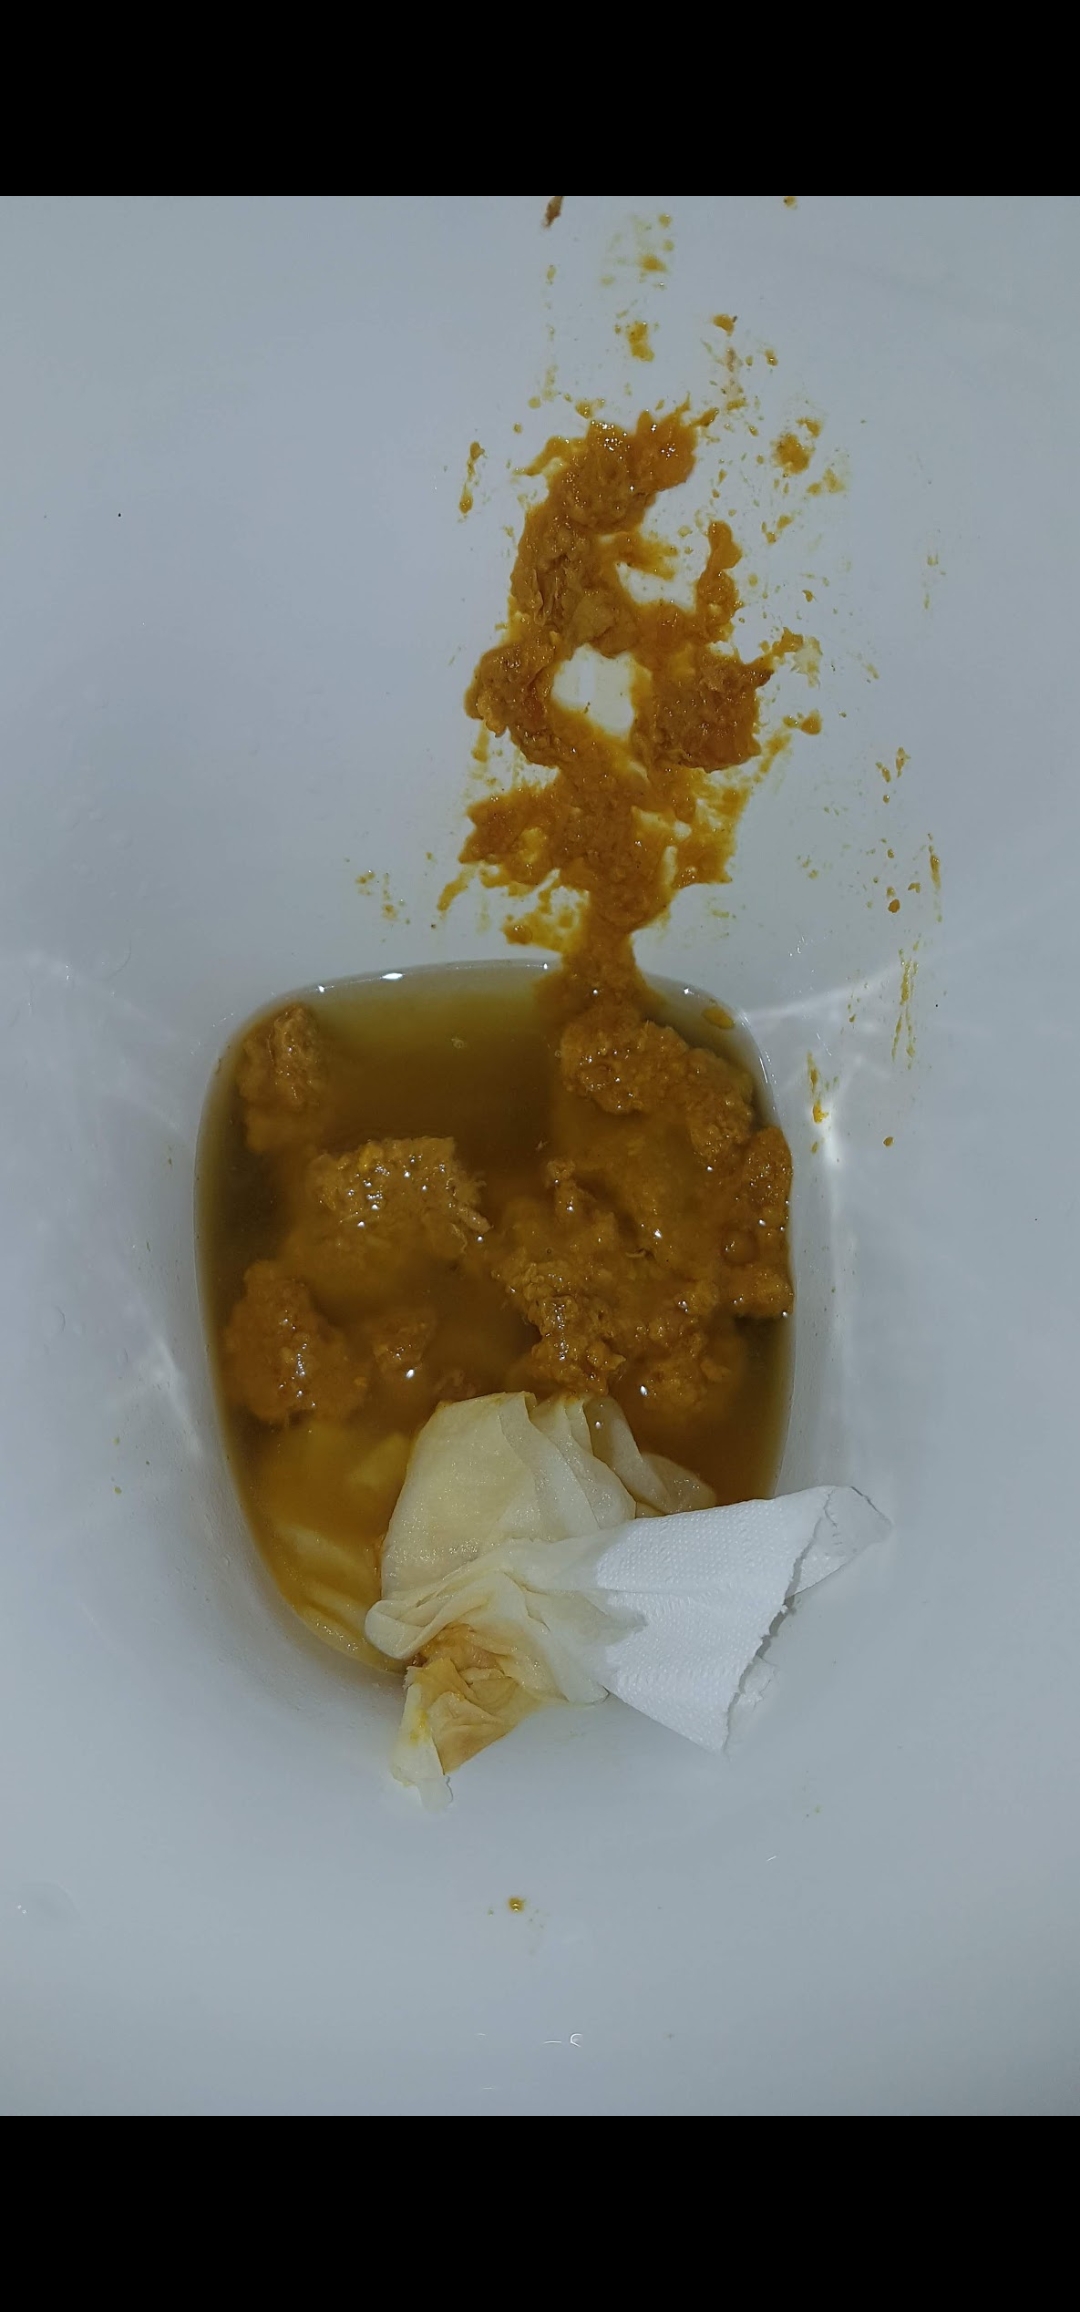 2nd sloppy Hungover shit on my mates loo